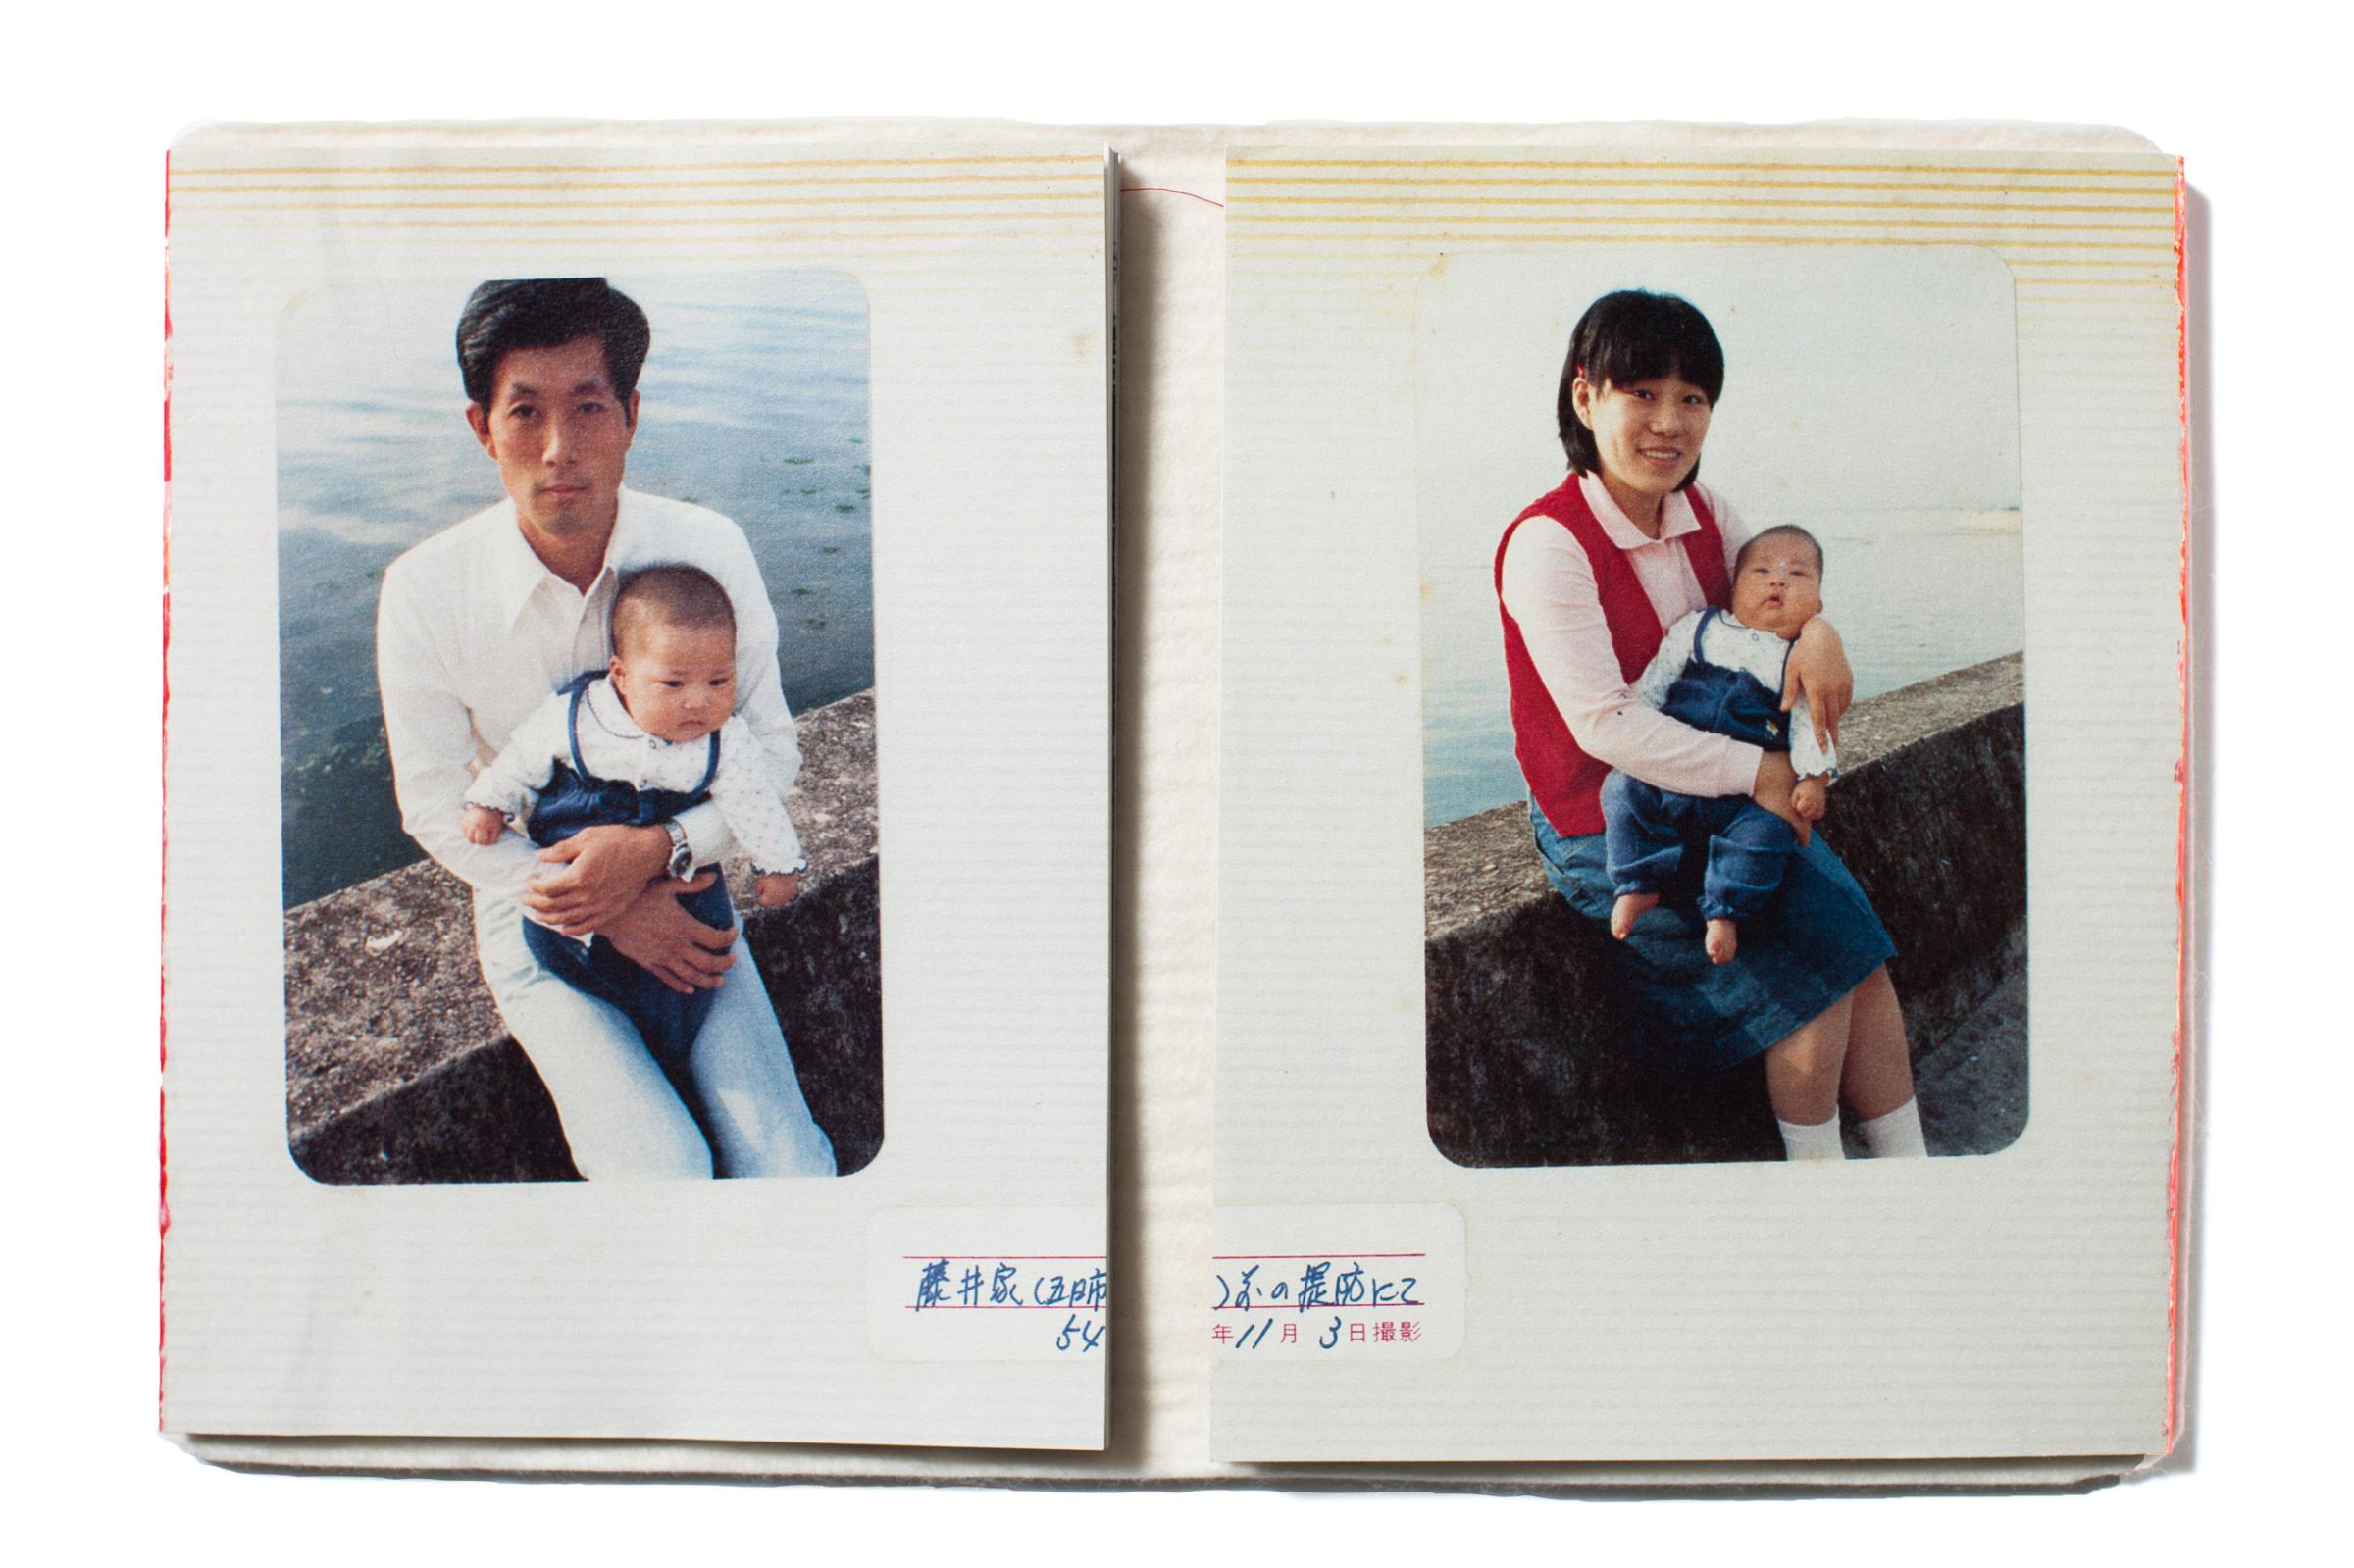 "The split binding allows the reader to page through one side and then the other, but the powerfulness comes from pairing both halves together. In this delicate and personal family album, Yoshikatsu Fujii ties the memory of his family back together with the cultural metaphor of red string."- Larissa LeClair